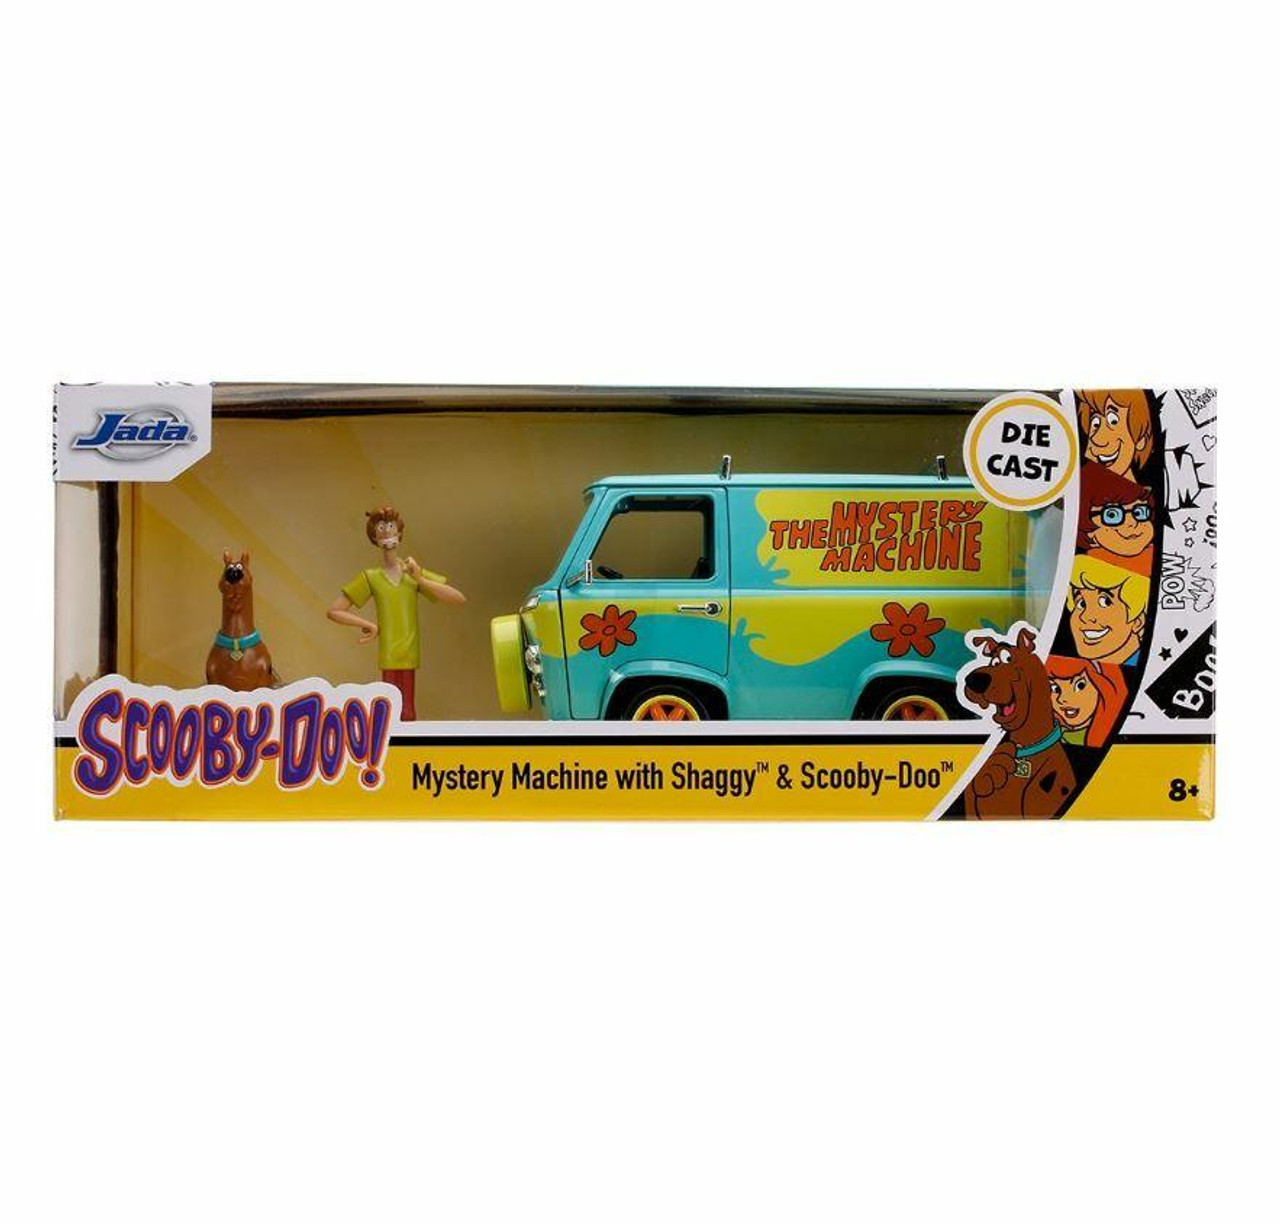  Basic Fun Scooby Doo Mystery Machine Lights and Sounds and  Figures : Toys & Games